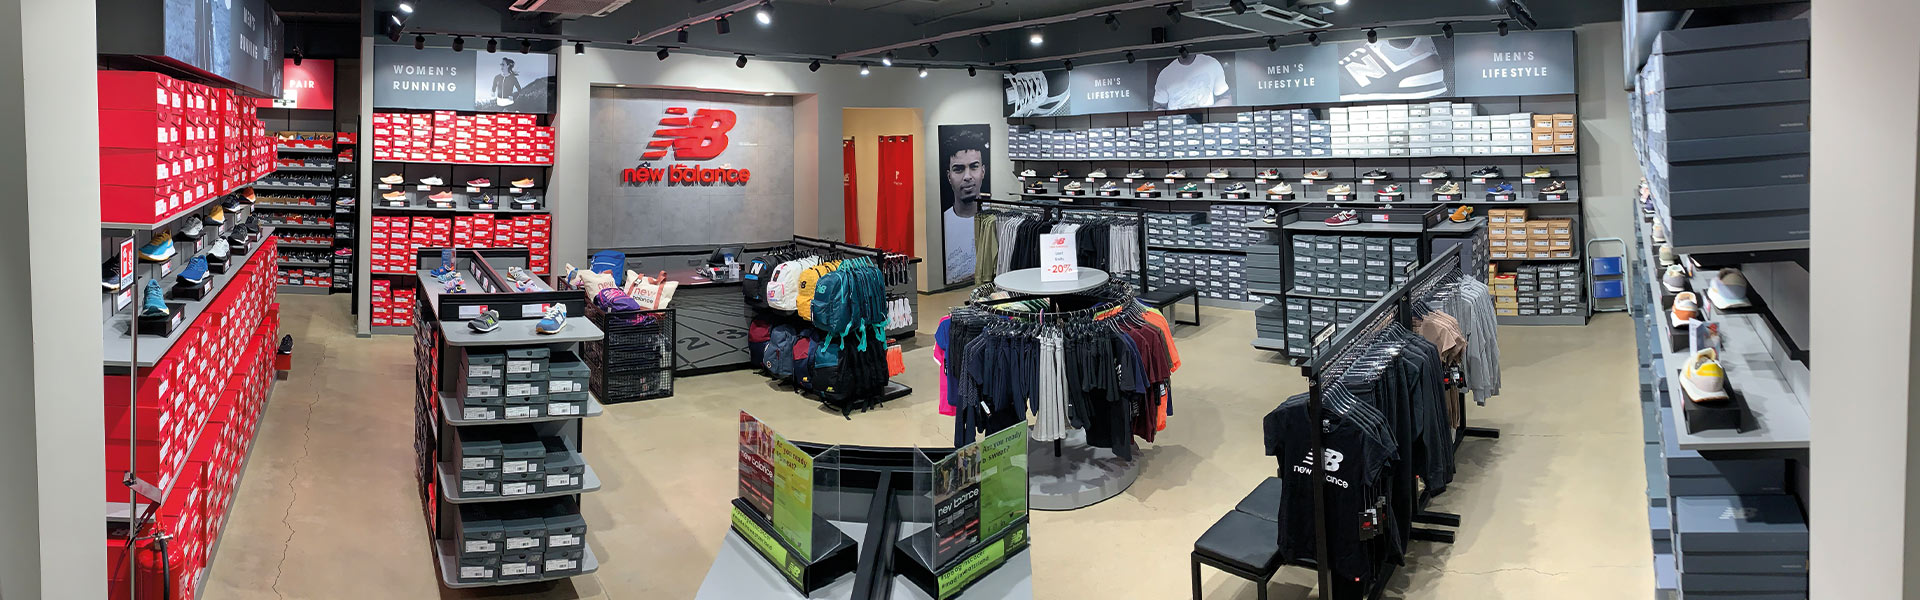 NB Outlet Mendrisio